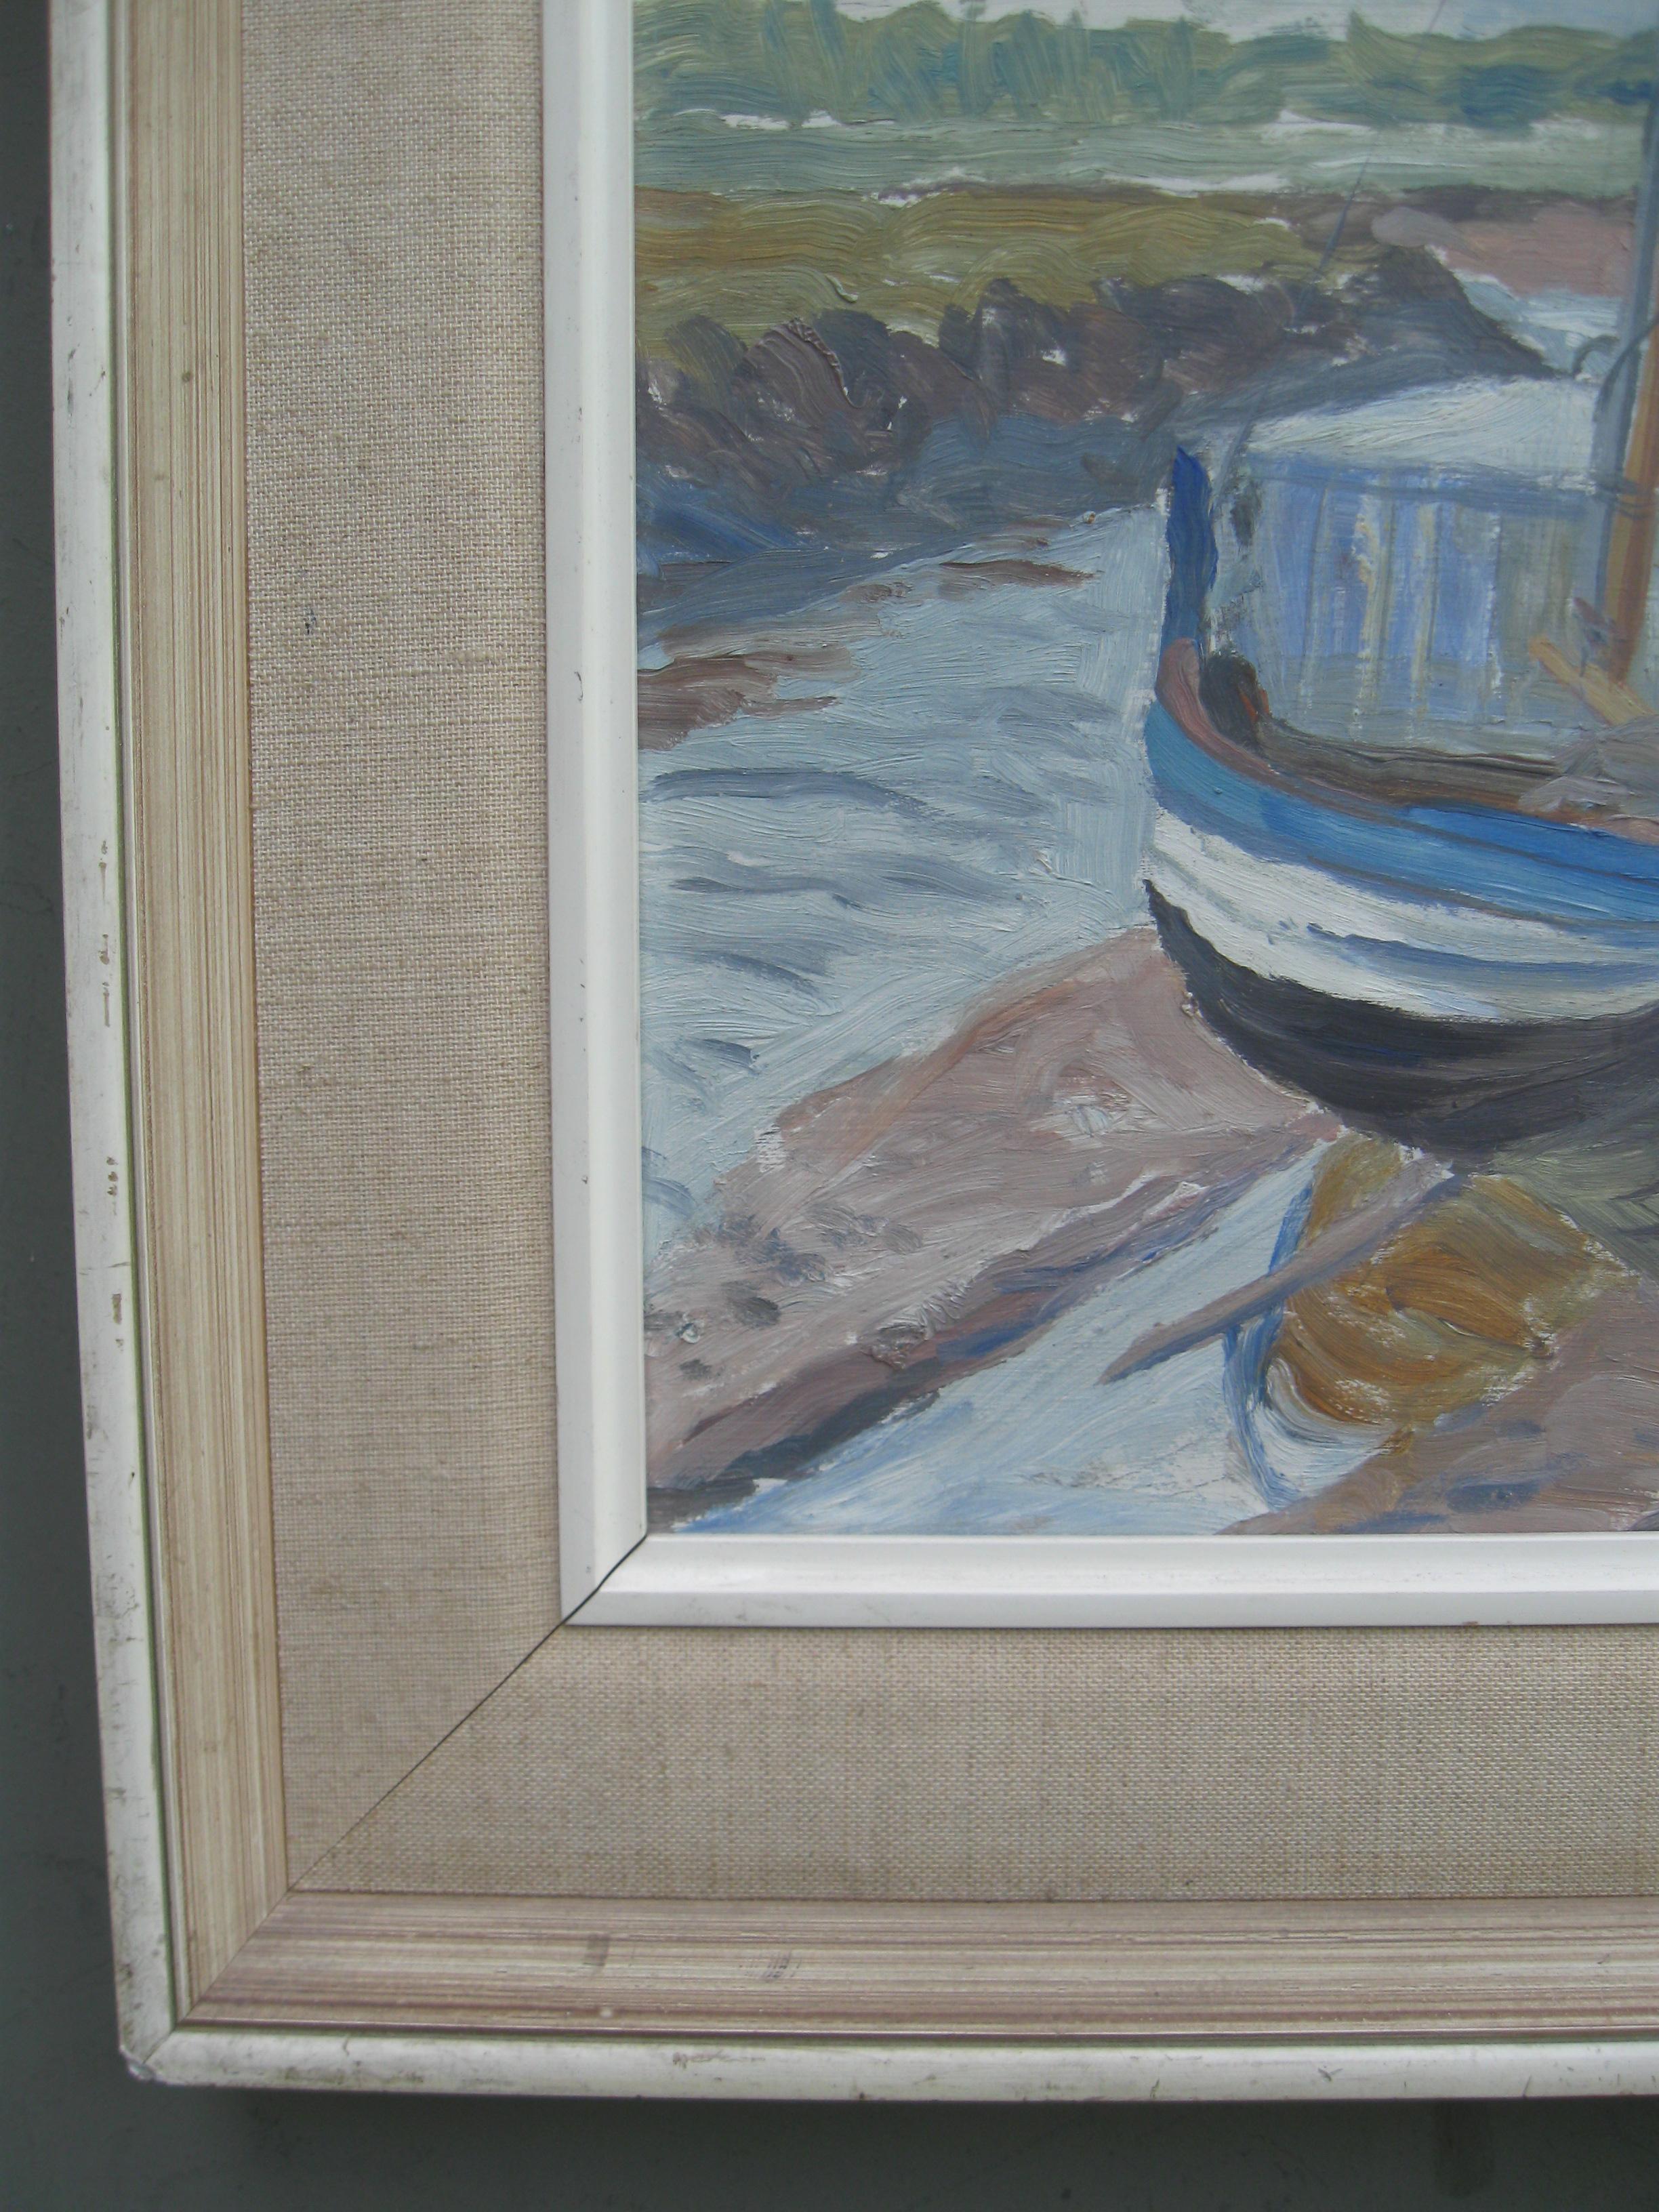 A good mid century Post Impressionist/ Modernist oil, 'Sailboats at Low Tide' circa 1965.
oil on board 49cmx59cm
The original good quality gallery frame 65cmx75cm
Painted en plein air with wonderful efficacy.
The small sailboats are beached at low